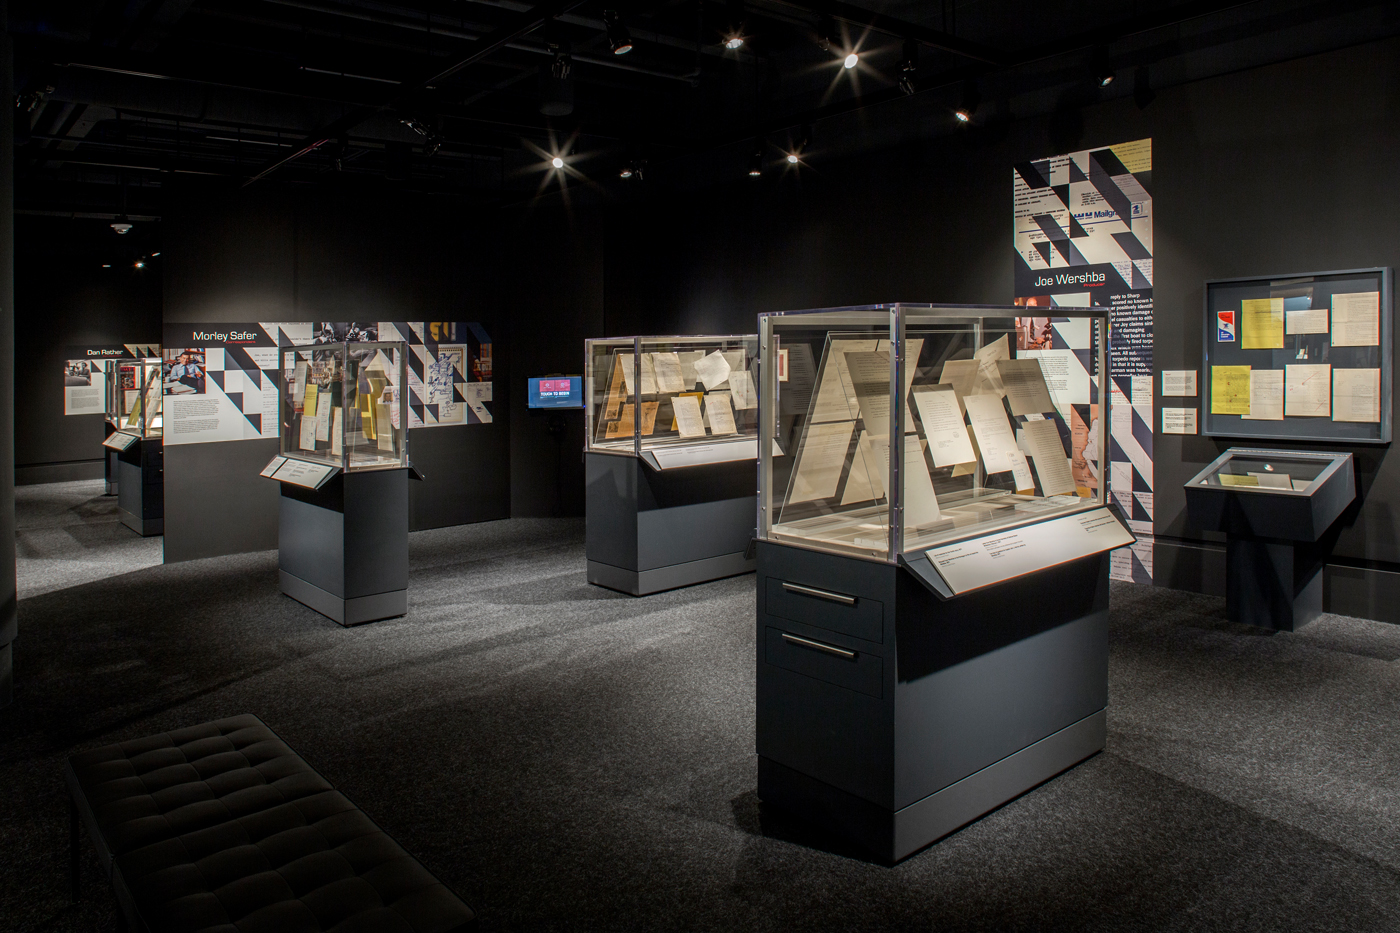 Dark exhibit room with display cases displaying many documents.